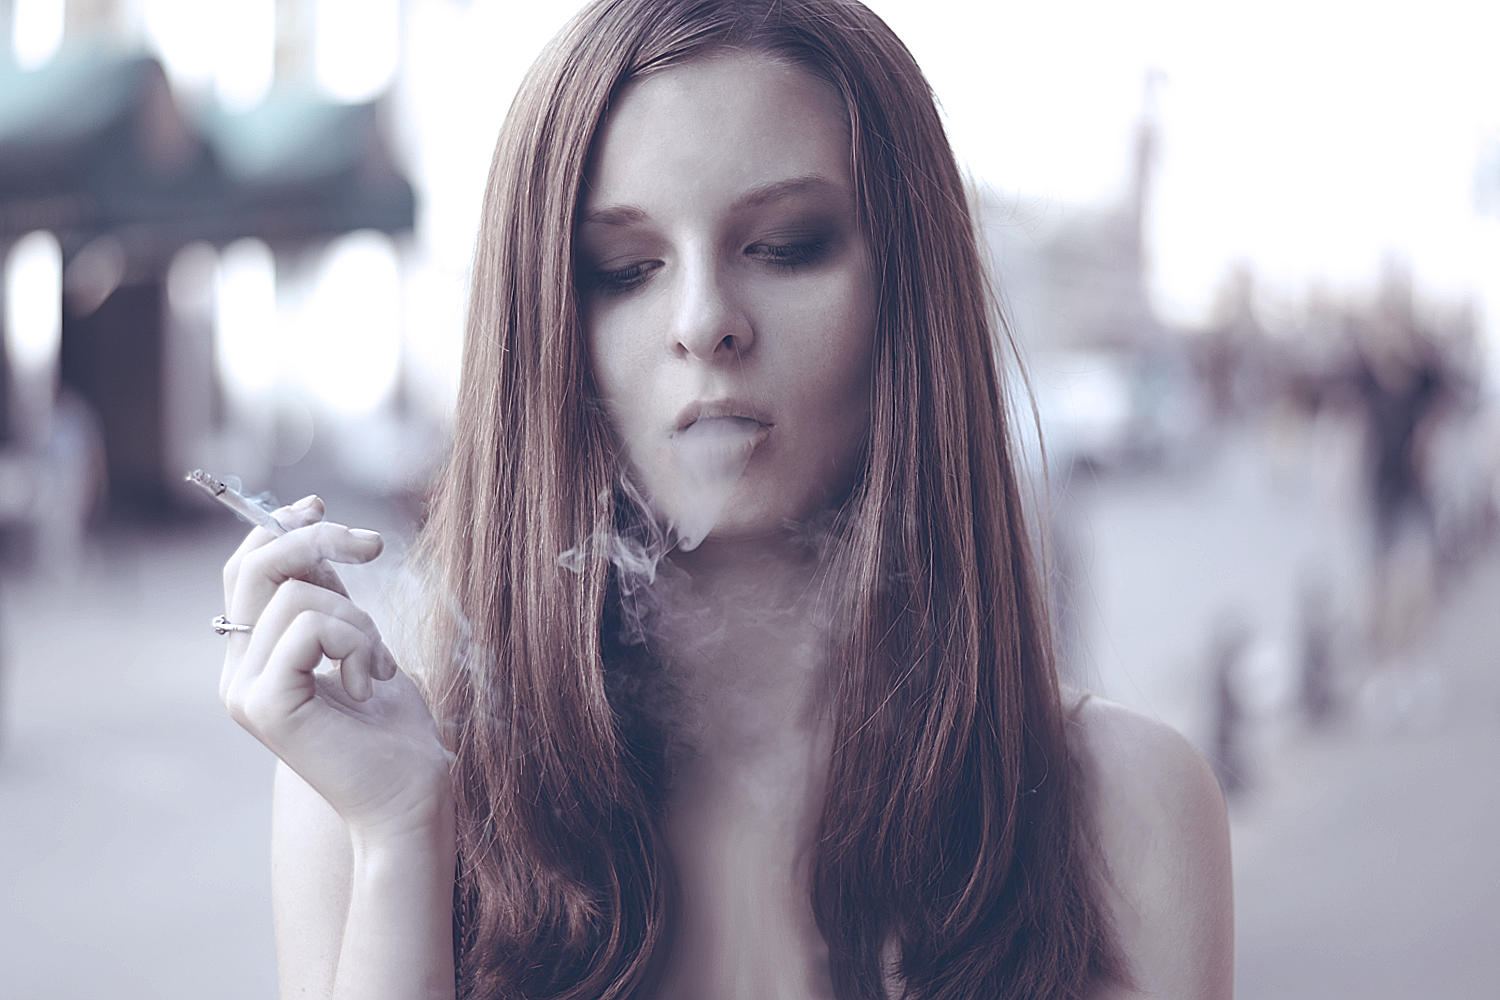 Brunettes smoking women wallpaper wallpapers and images   wallpapers